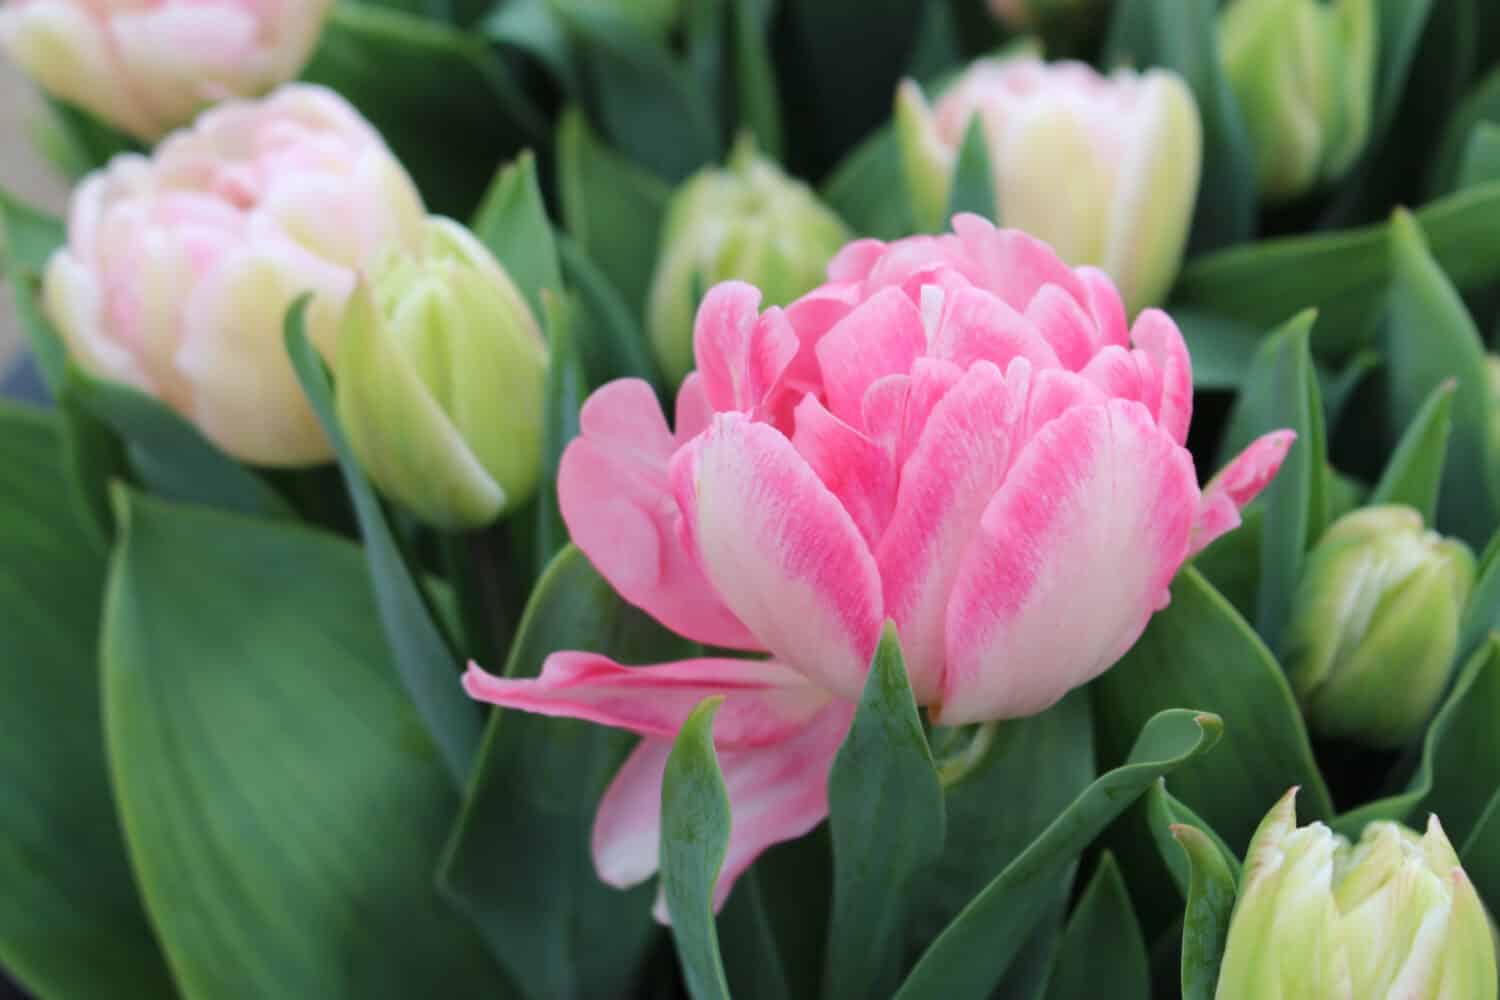 Tulip "Foxtrot". Flower bed of pink double tulips. Spring in the Netherlands.